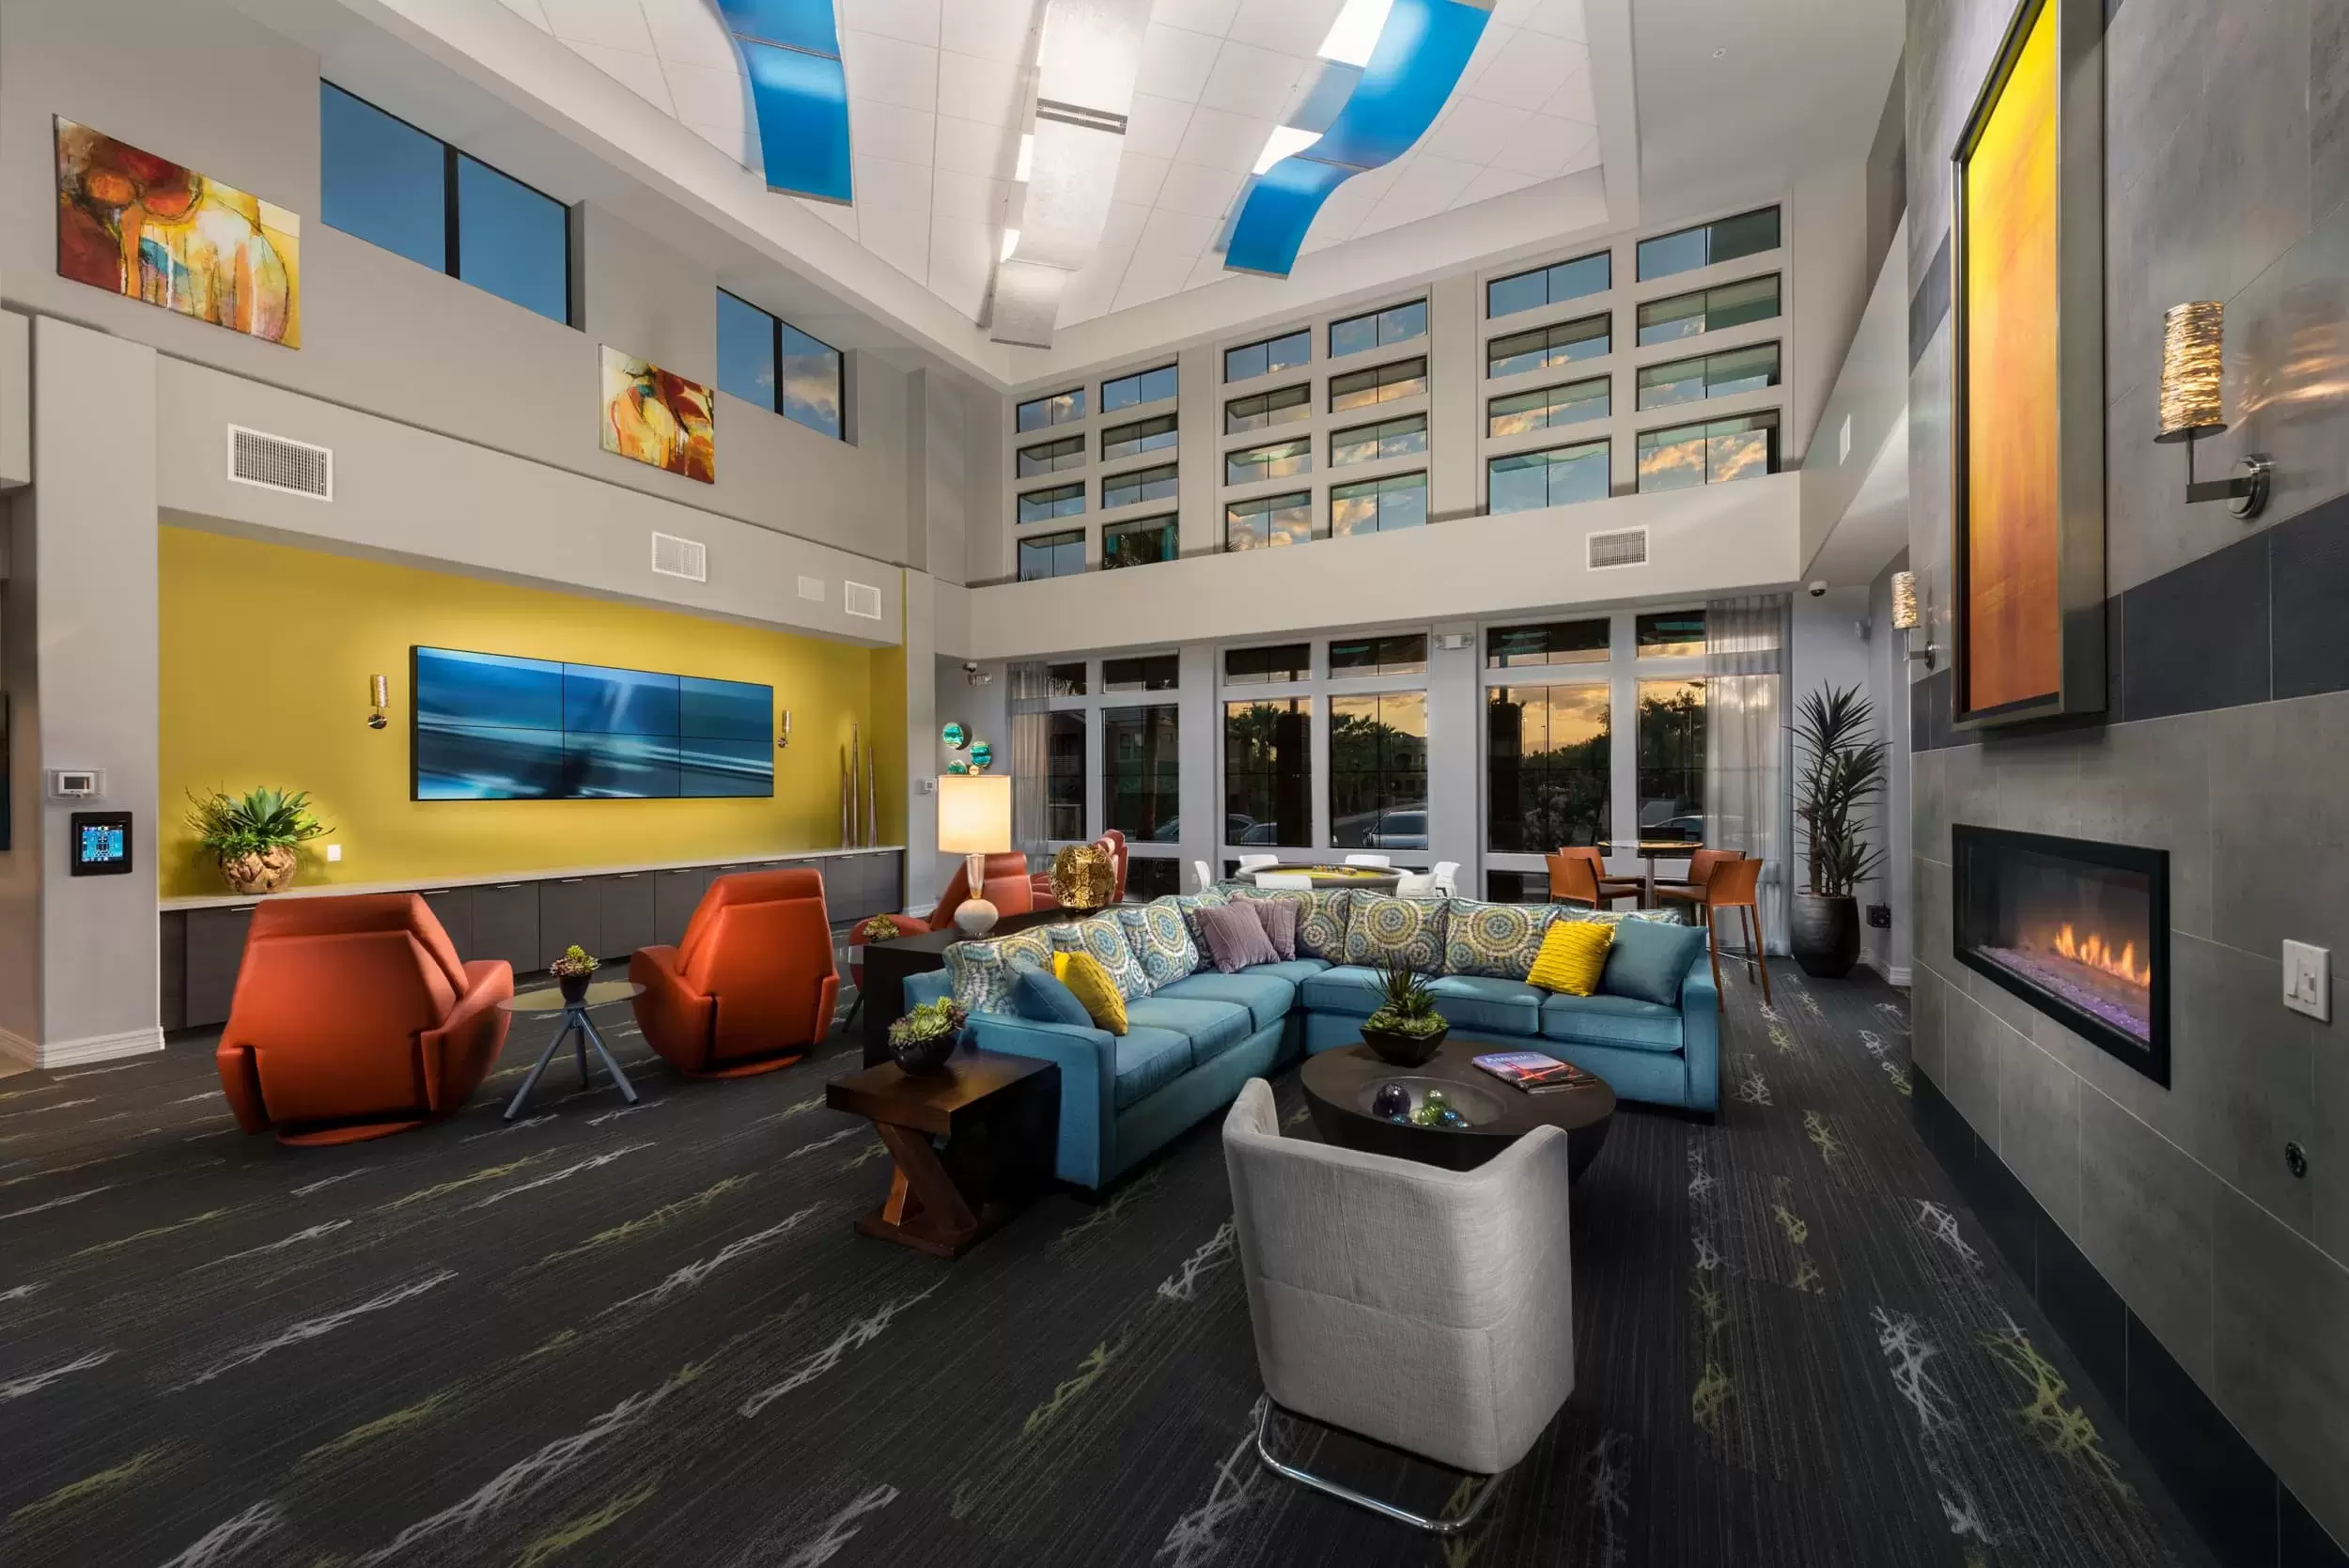 The Resident Hub, with plenty of comfortable seating for residents to socialize or relax.